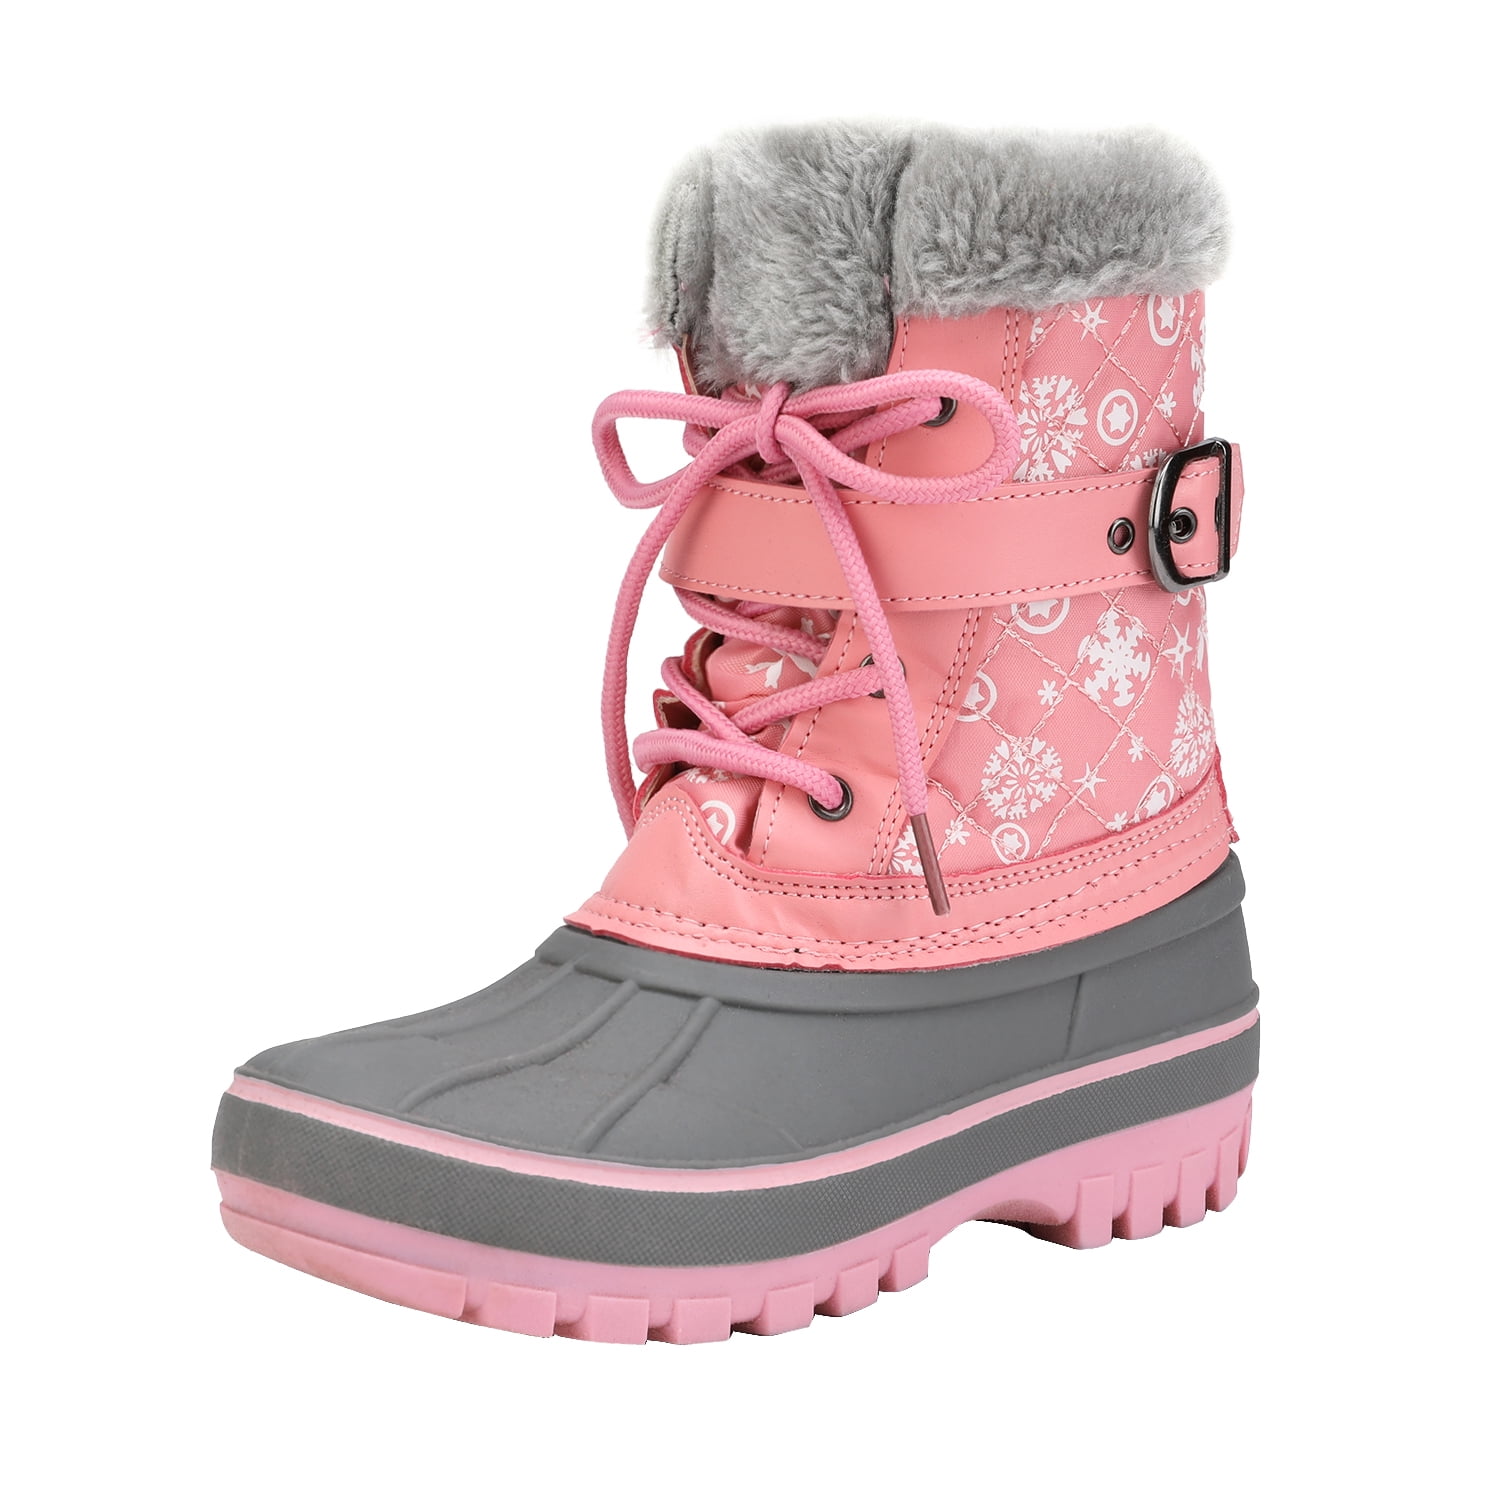 Toddler Little girls light pink Size 10 Rubber  Sole Winter Snow Boots New,wool. 